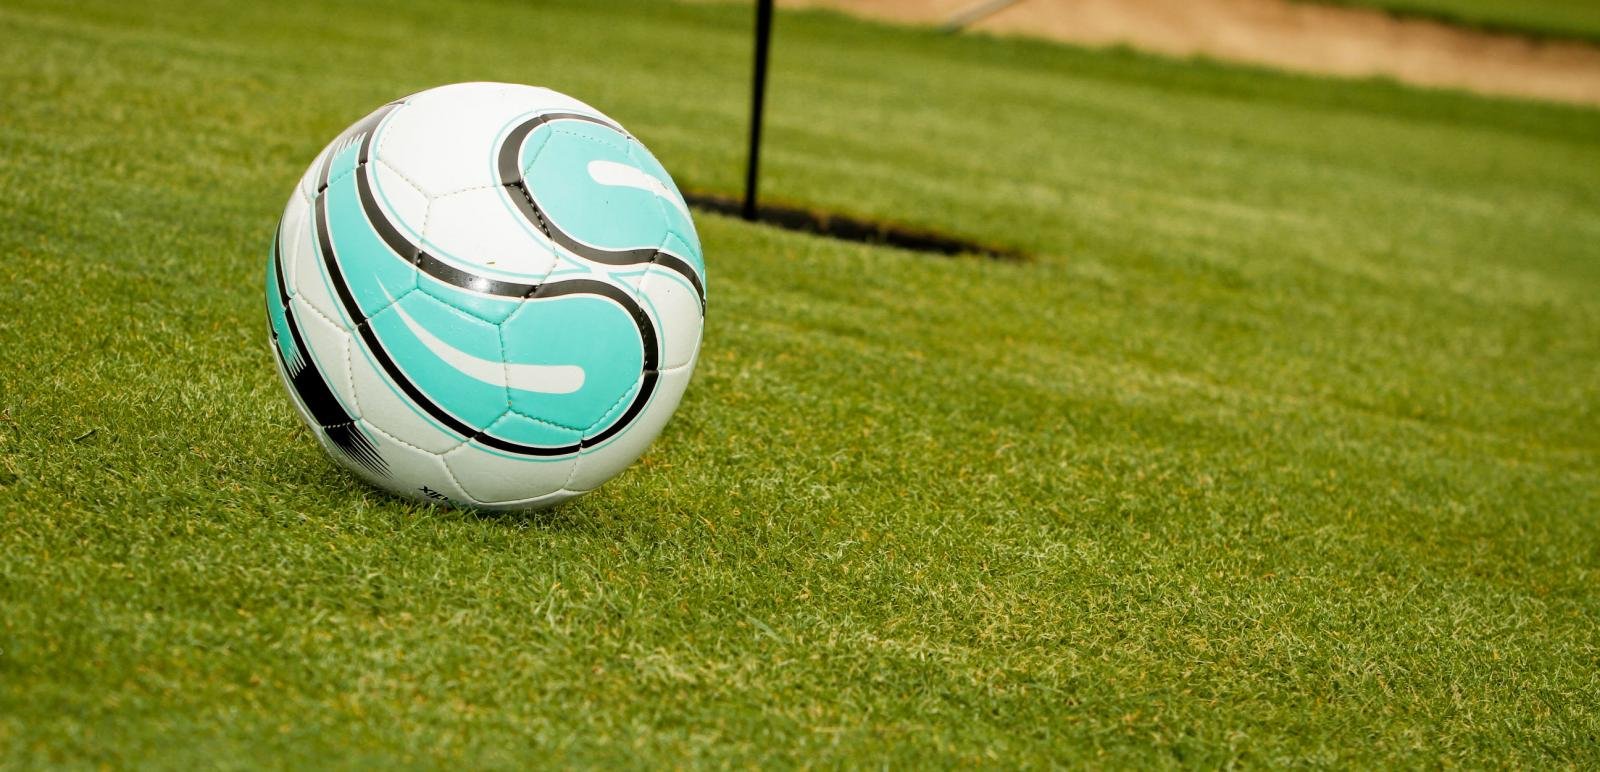 COMPETITION HAS ENDED: Free round of Footgolf for 4